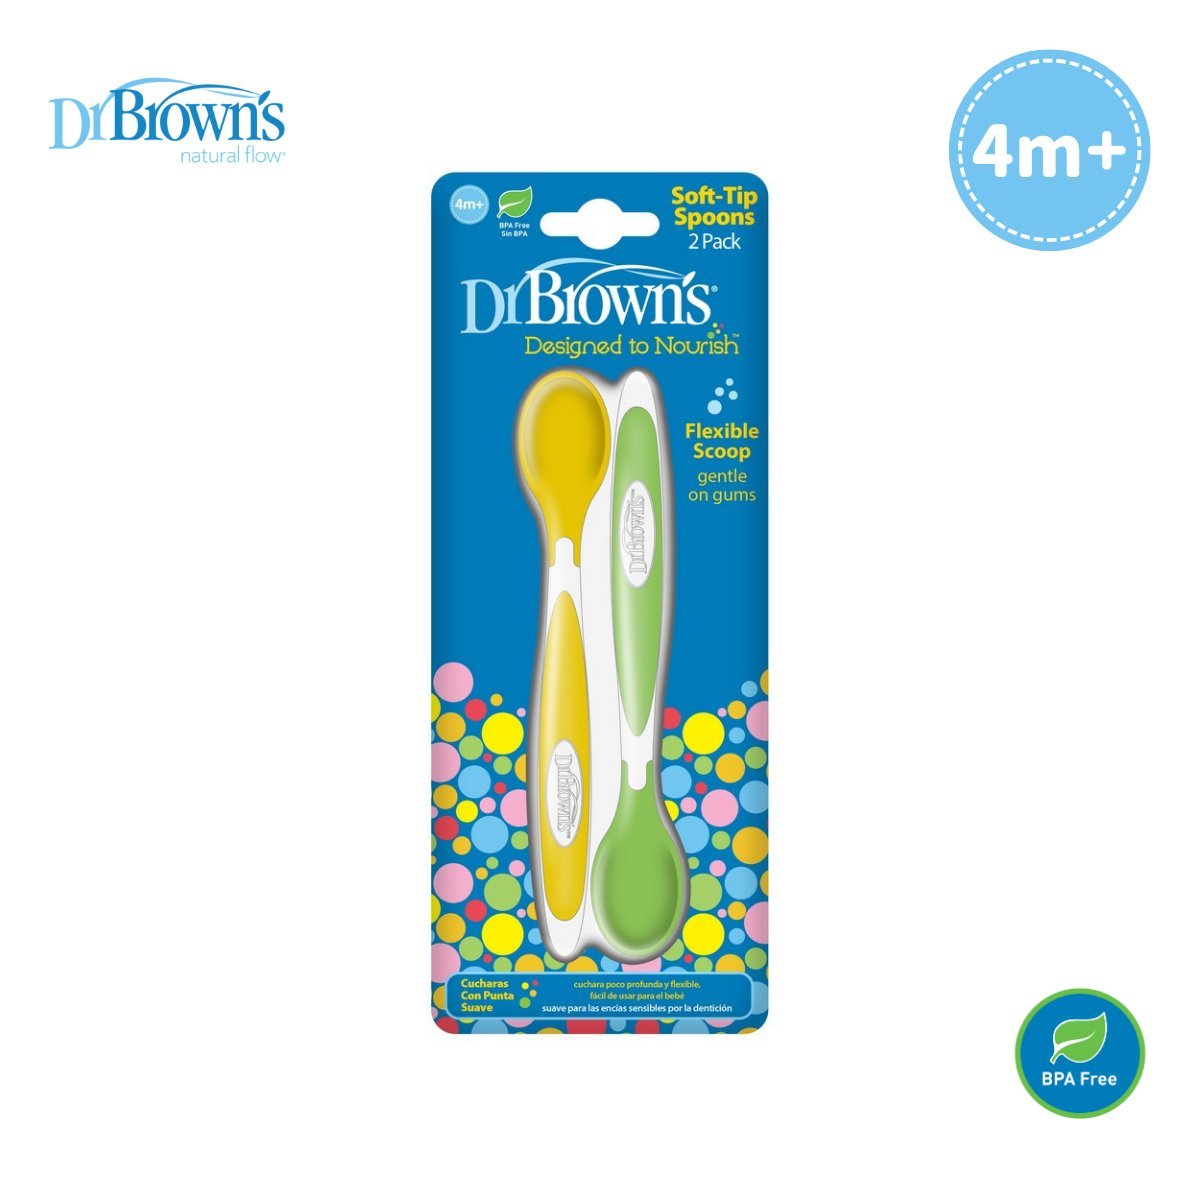 Elevated Soft-Tip Spoon 2-Pack